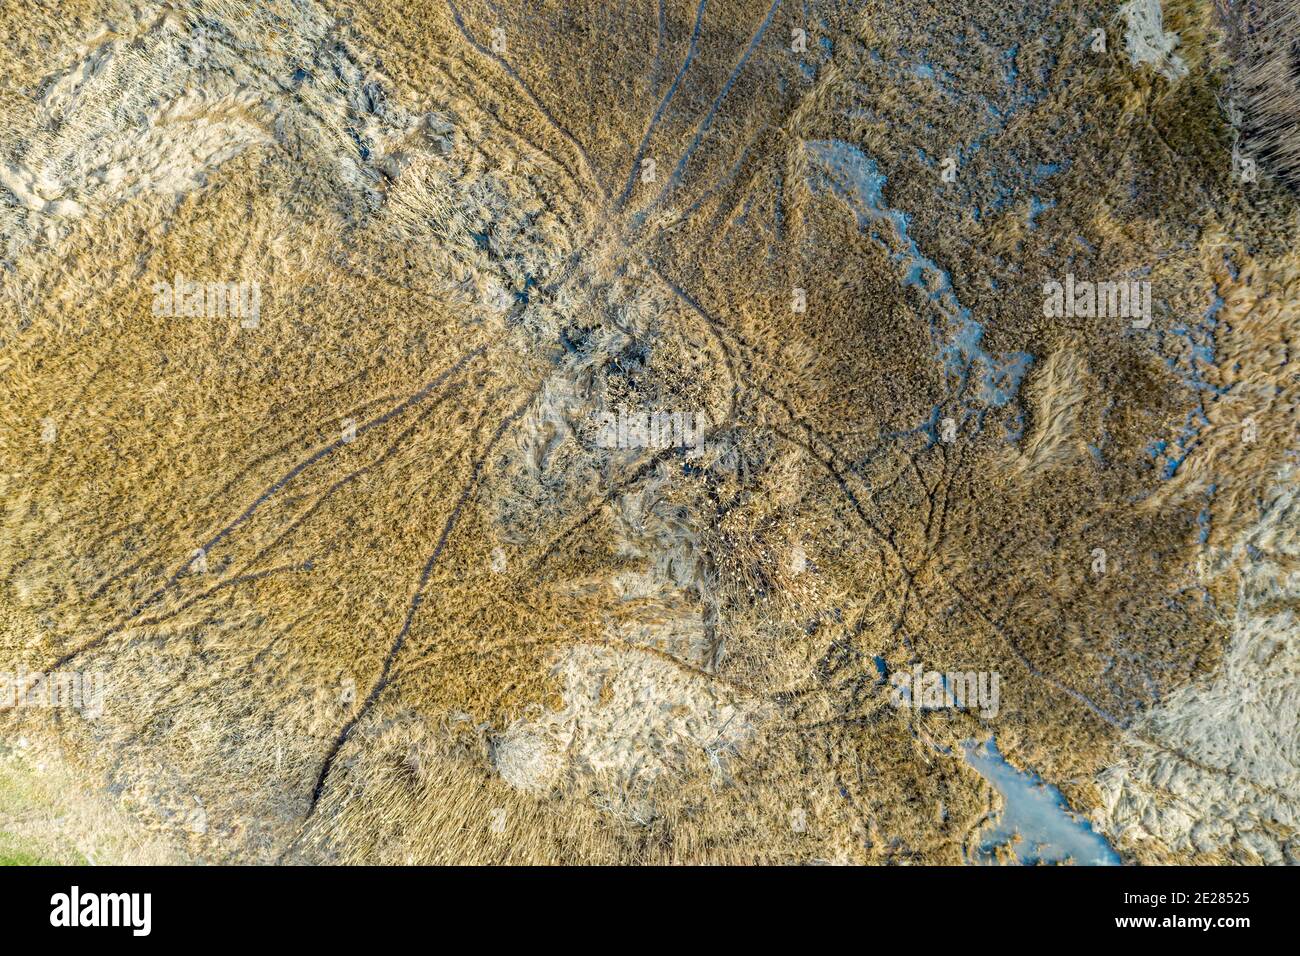 Aerial image of random paths used by deer in a winter landscape Stock Photo